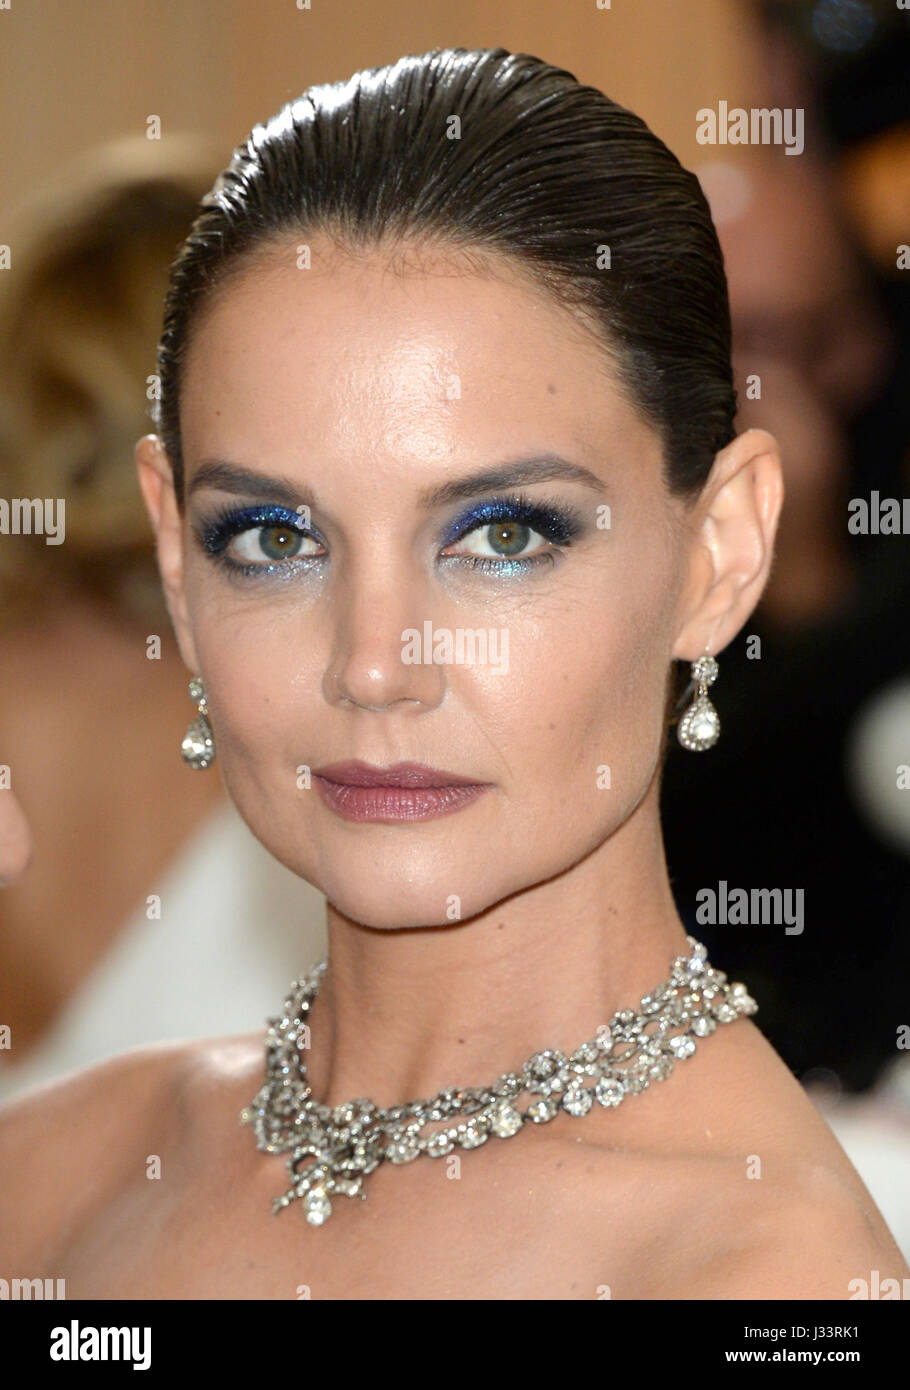 Katie Holmes attending The Metropolitan Museum of Art Costume Institute Benefit Gala 2017, in New York, USA. PRESS ASSOCIATION Photo. Picture date: Monday 1st May, 2017. See PA Story SHOWBIZ Gala. Photo credit should read: Aurore Marechal/PA Wire Stock Photo